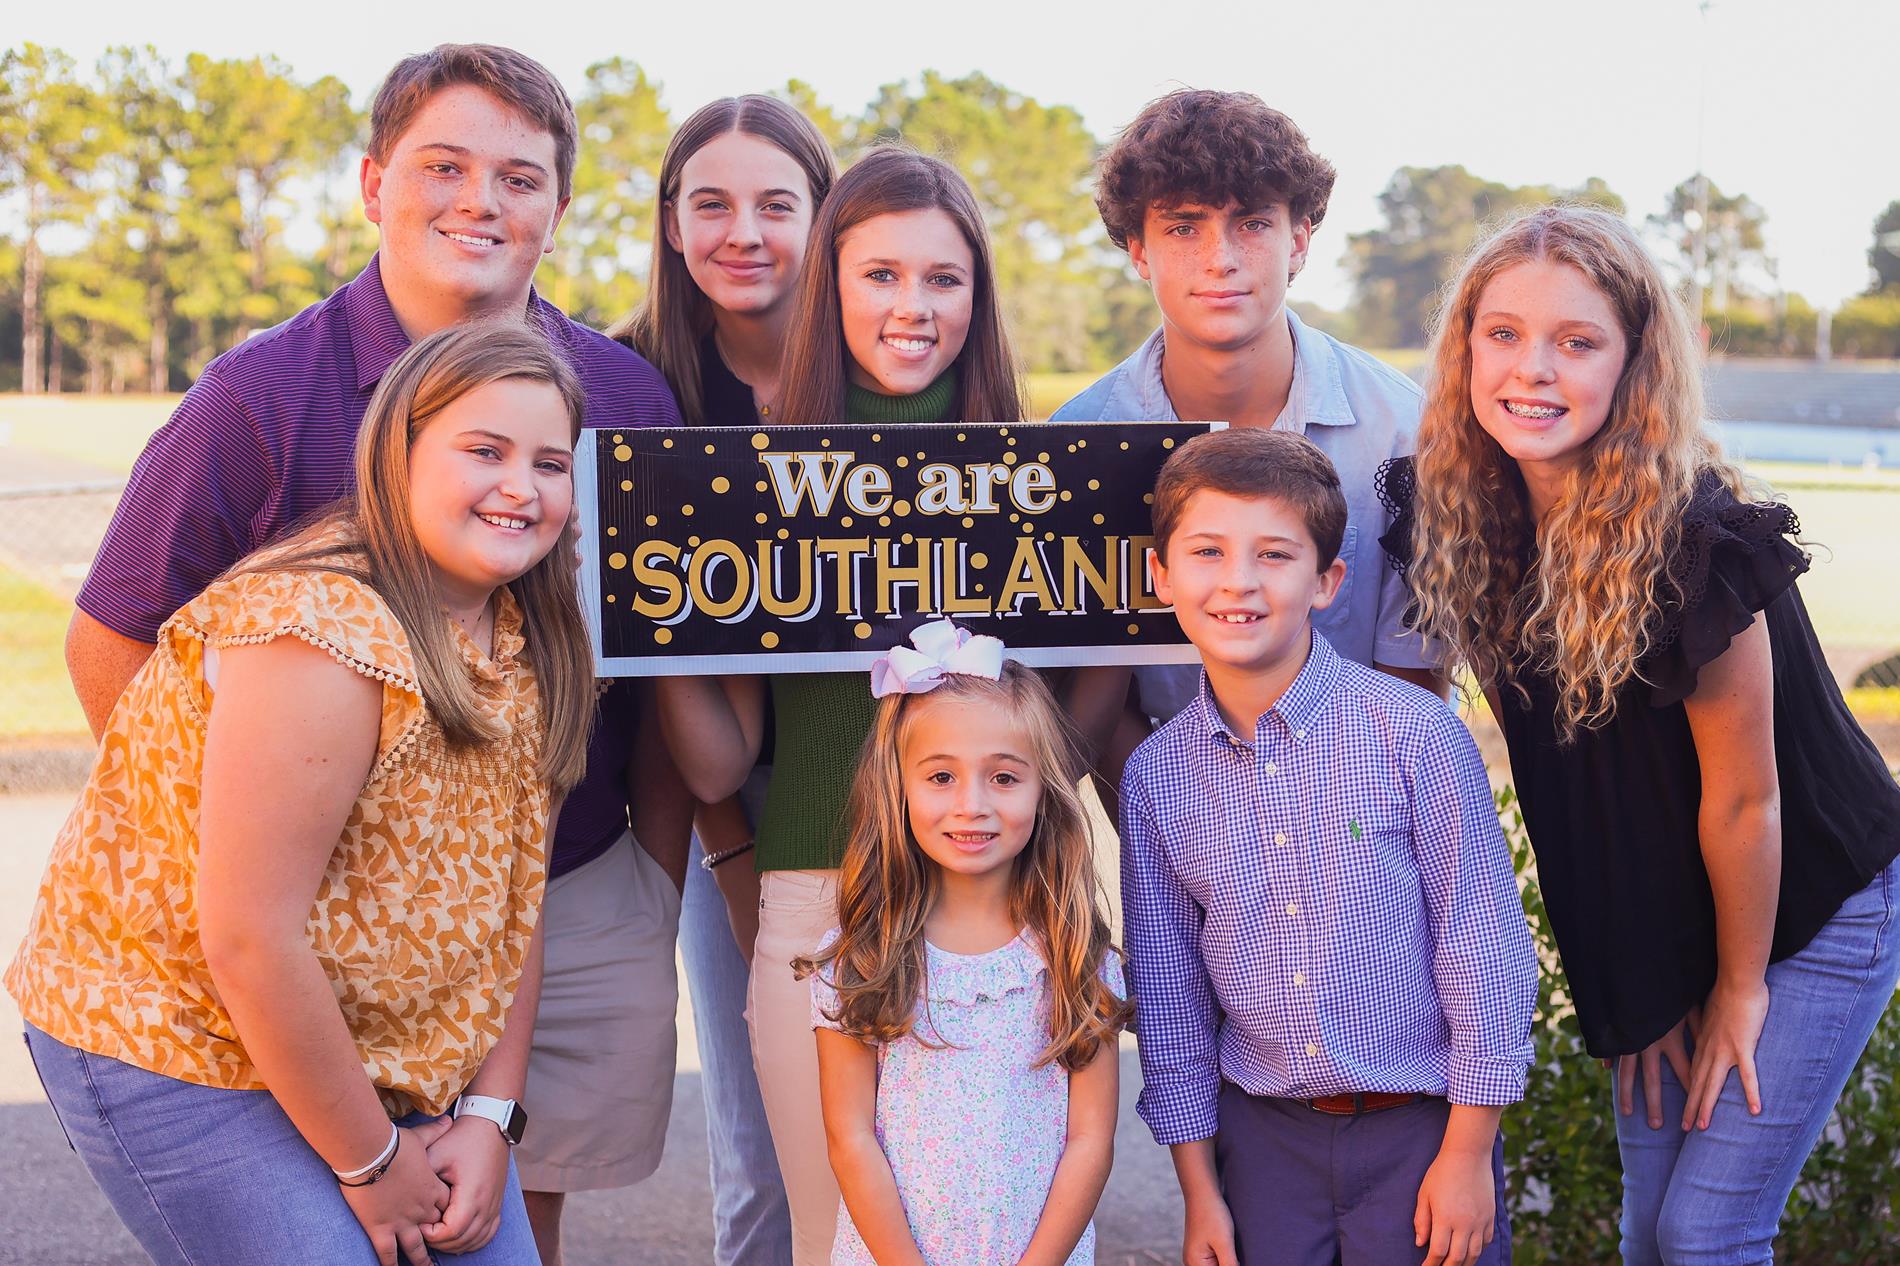 We are Southland